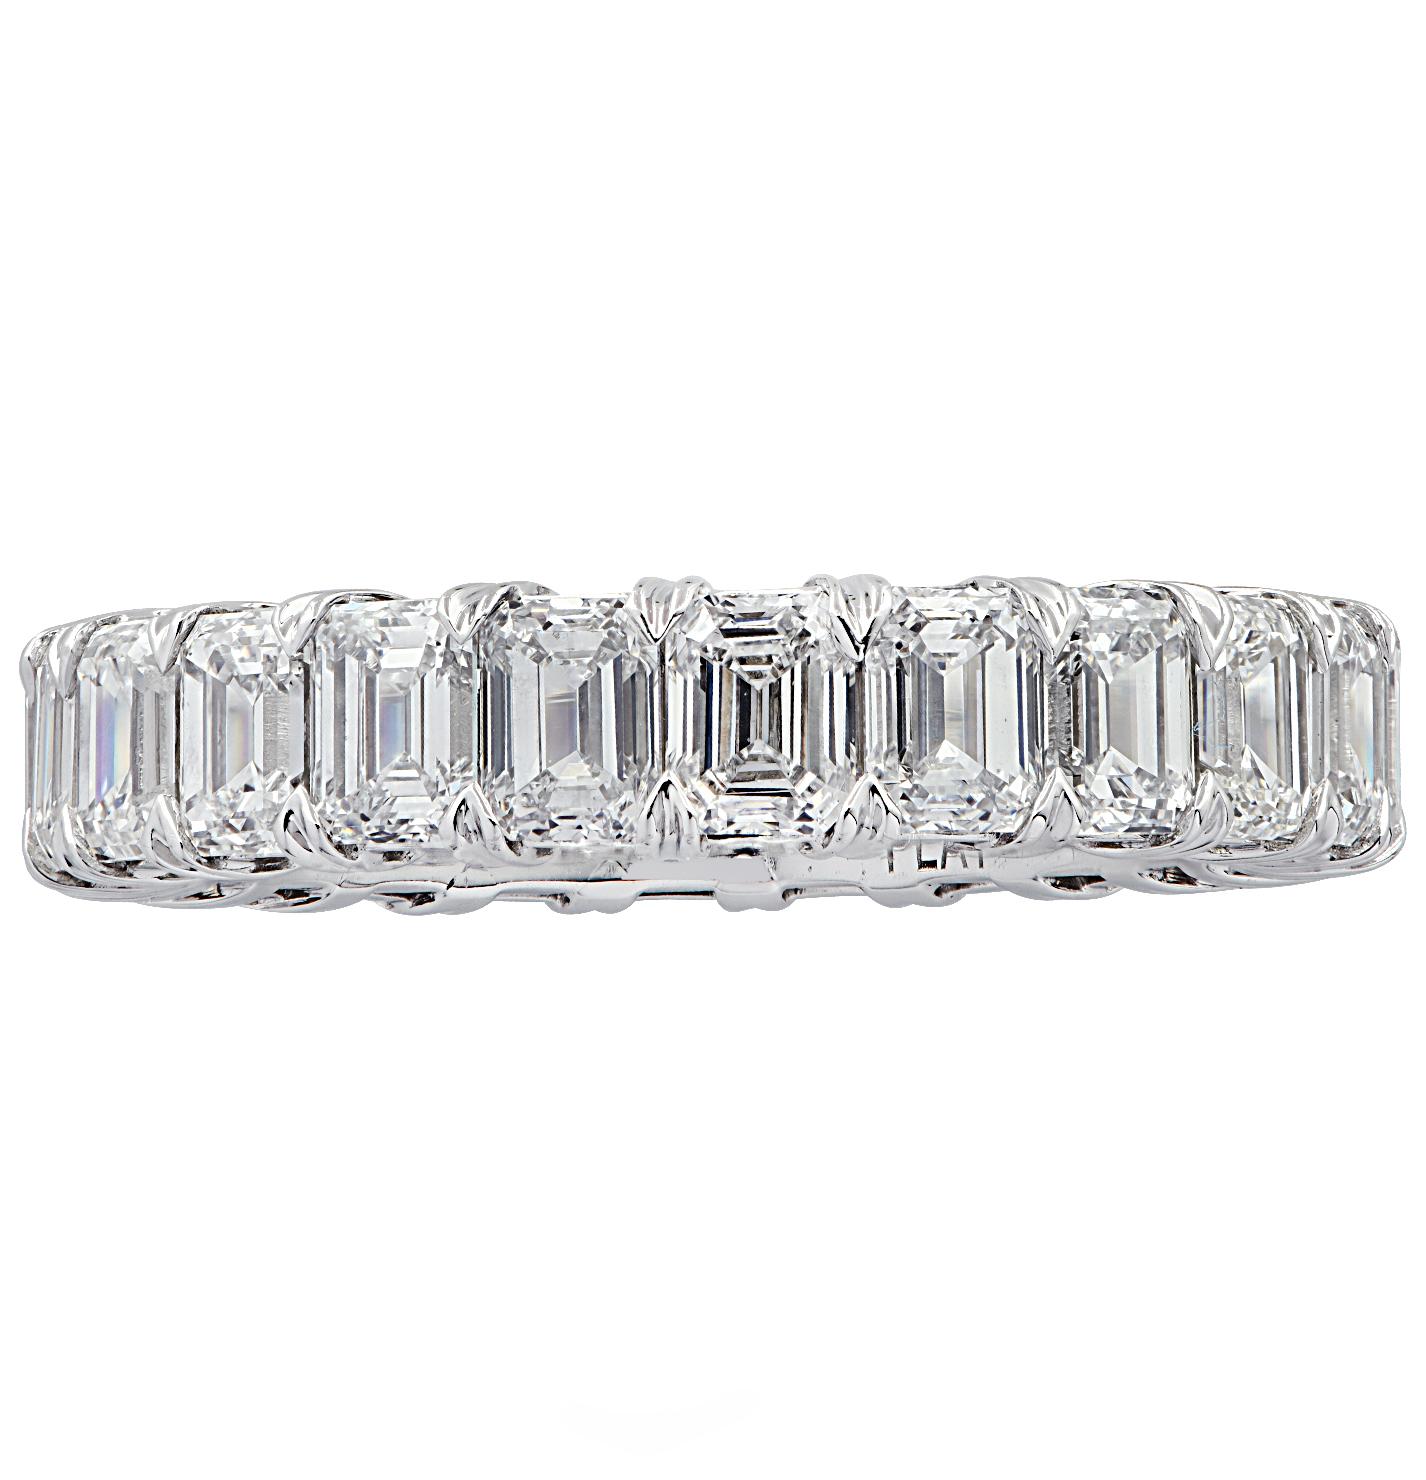 Exquisite Vivid Diamonds eternity band crafted by hand in platinum, showcasing 22 stunning emerald cut diamonds weighing  5.12 carats total, D-F color, IF-VVS clarity. Each diamond is carefully selected, perfectly matched and set in a seamless sea